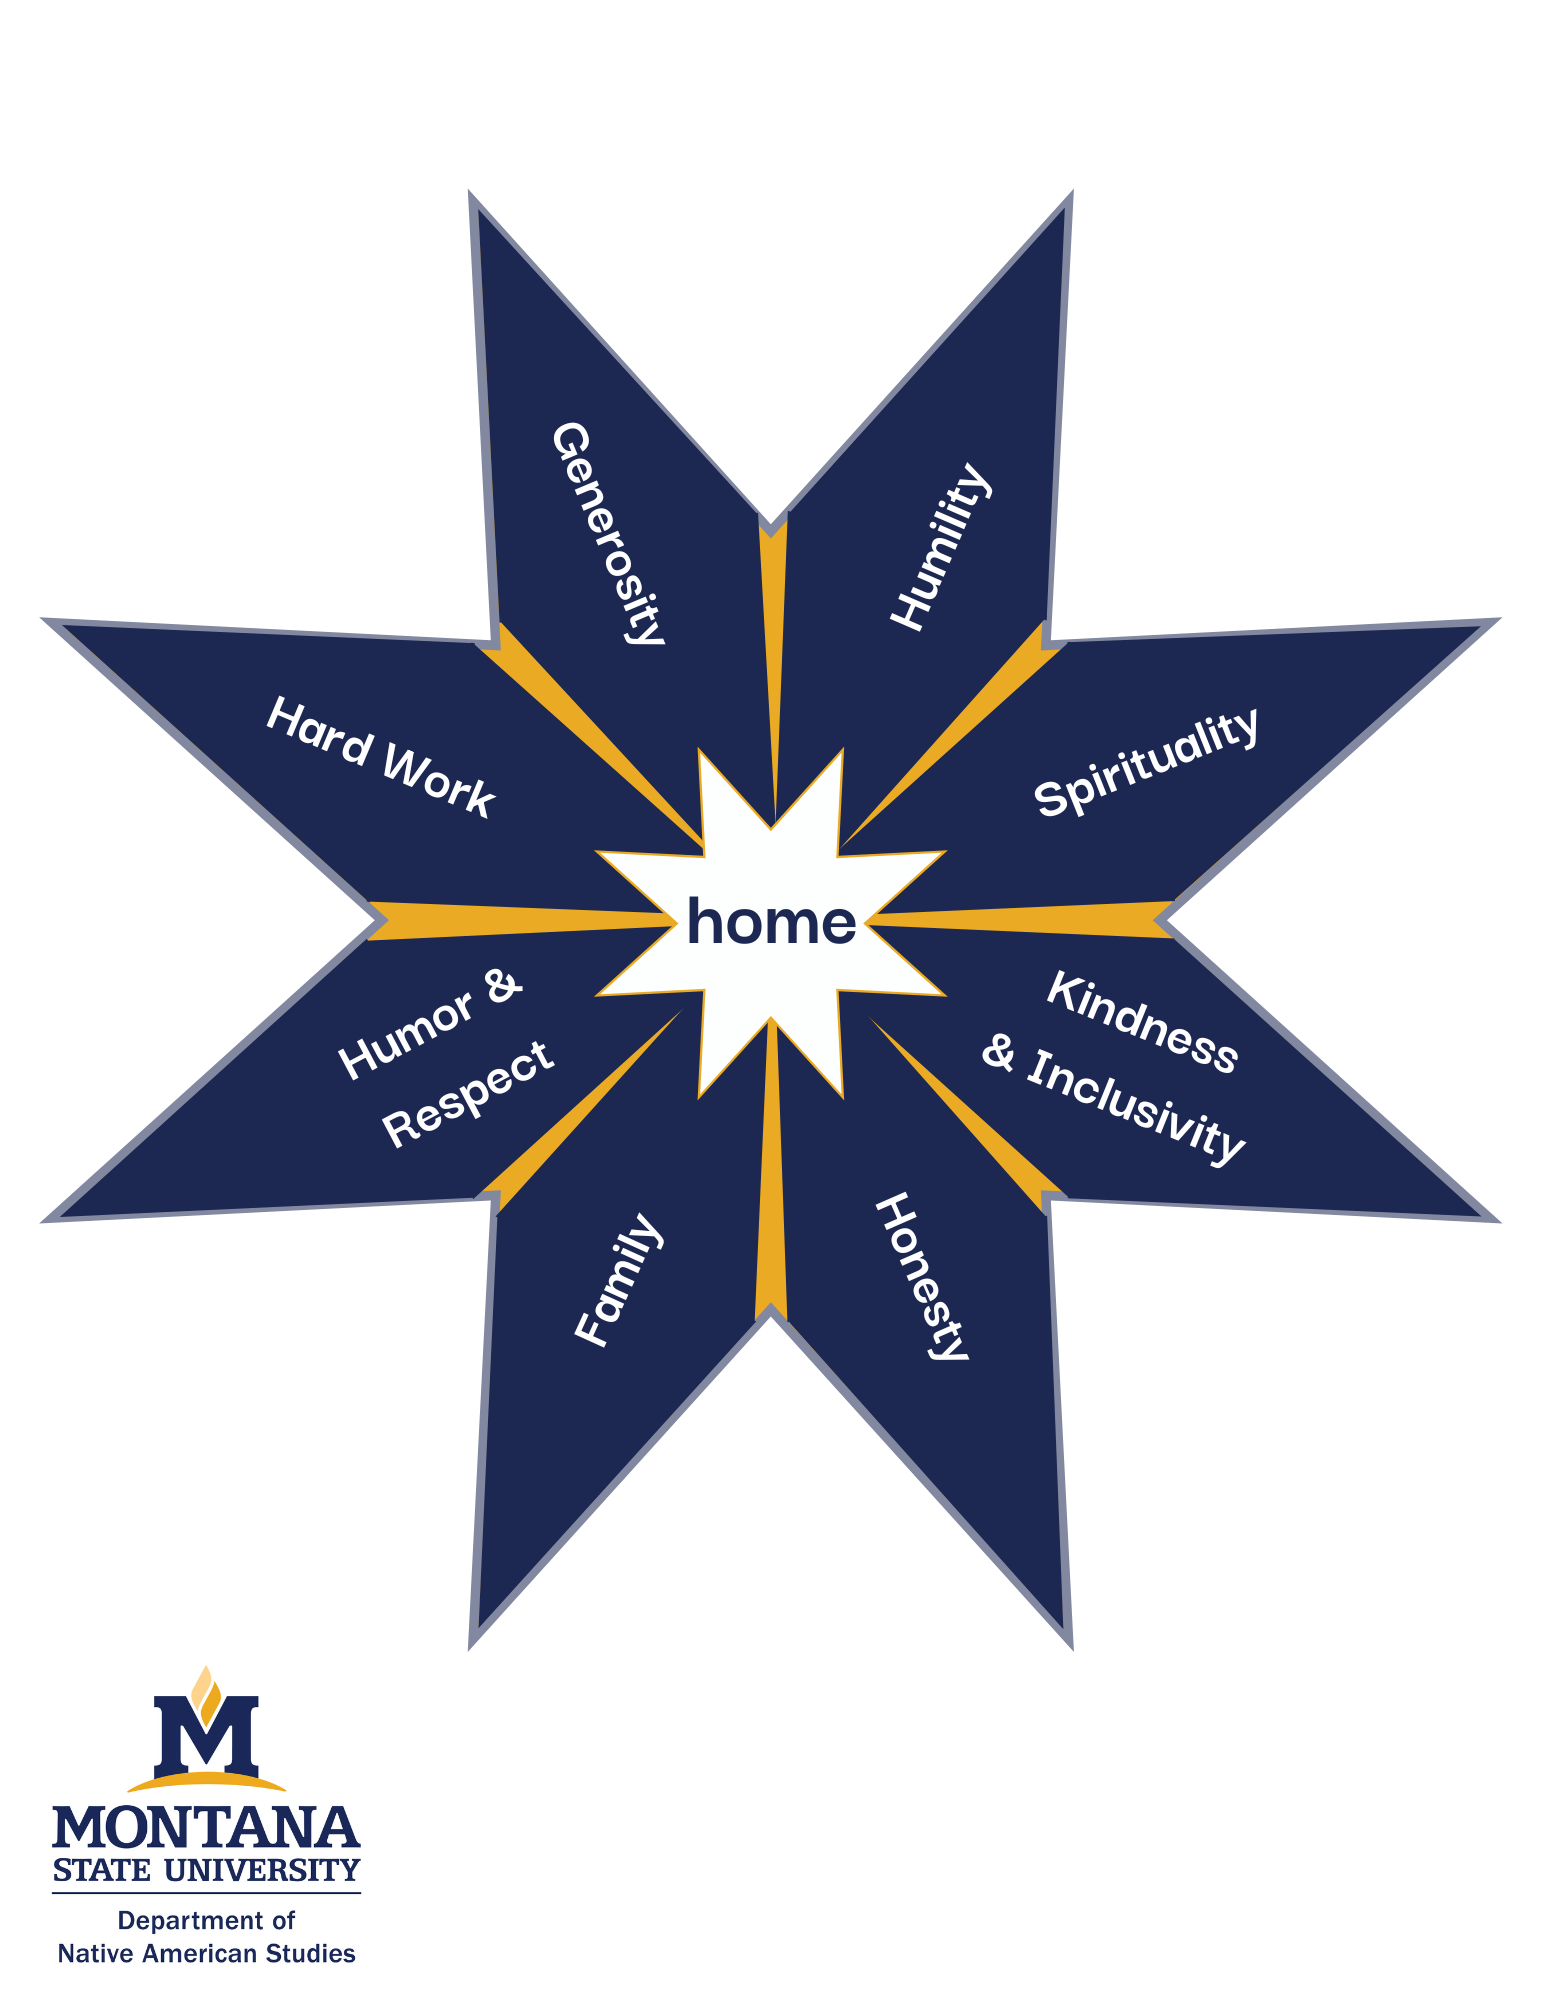 This is a diagram displaying our cultural values in a star pattern, featuring eight branches. Clockwise, from the top of the star, the are Humility, Spirituality, Kindness & Inclusivity, Honesty, Family, Humor & Respect, Hard Work, and Generosity. All of these branches converge in the center where home is pictured.